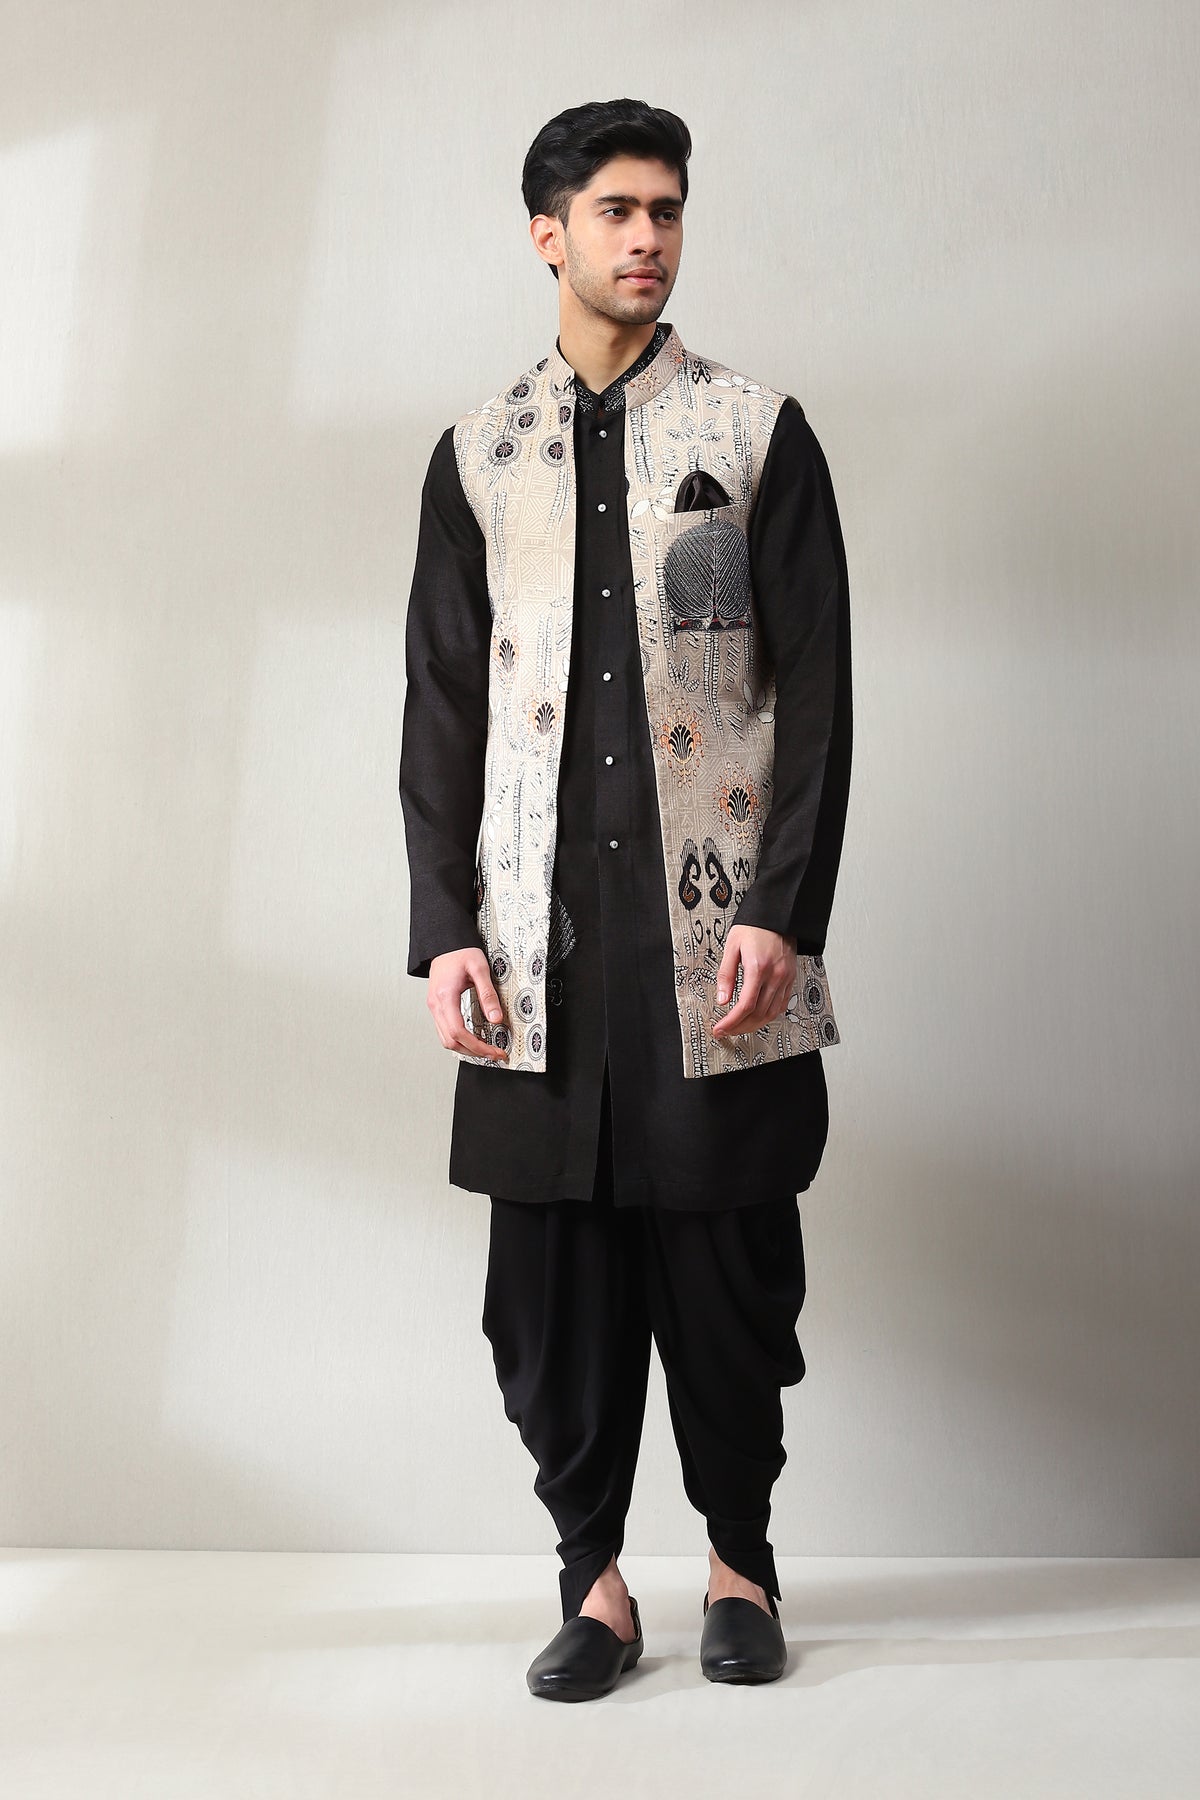 This handmade printed long jacket  has been embroided with aari tilla work on the jacket